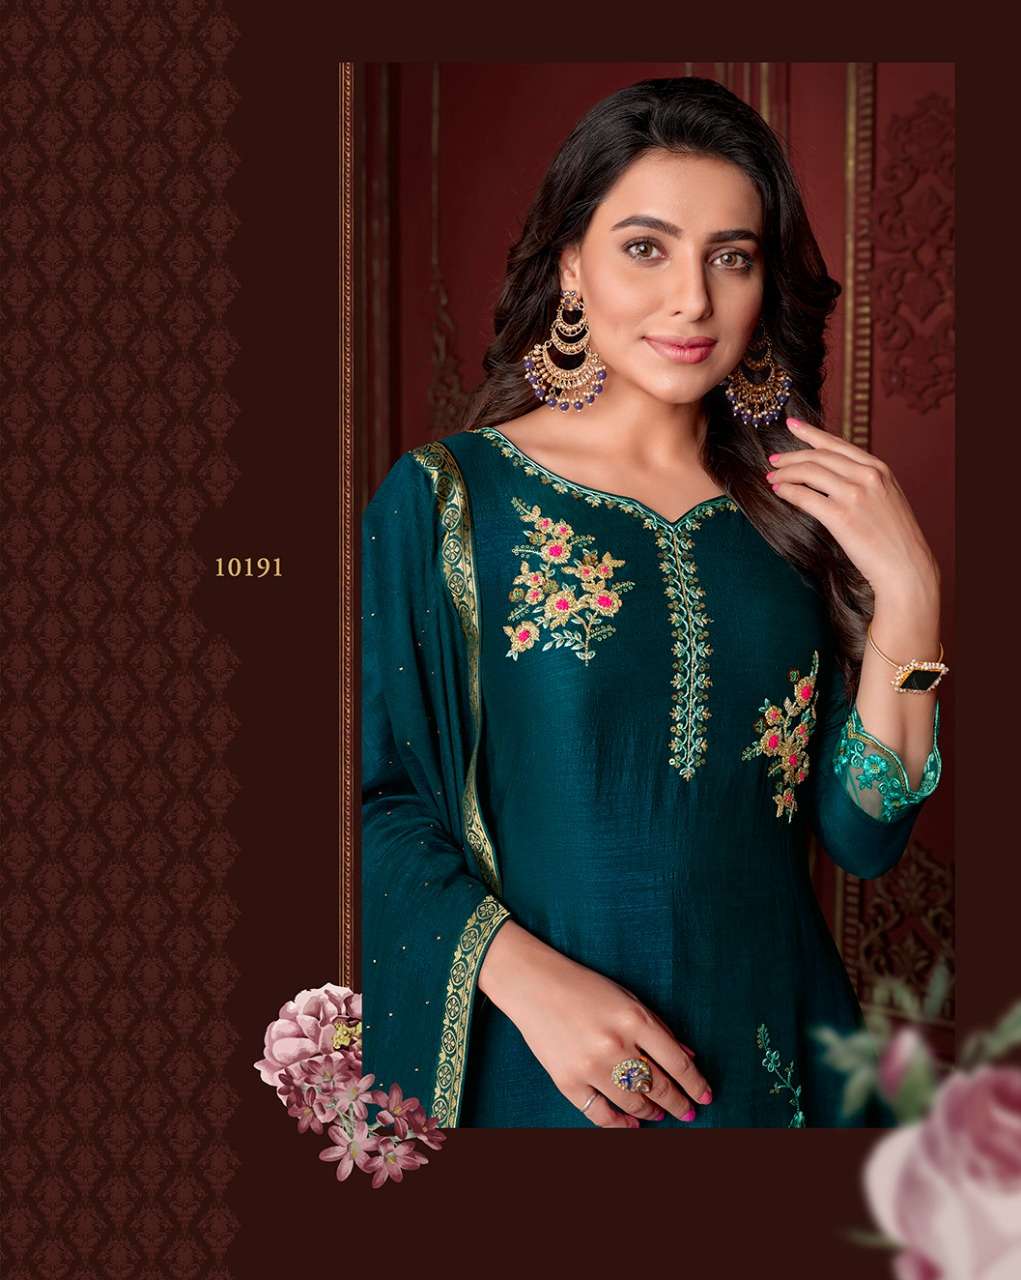 lily & lali malang 10191-10196 series silk designer exclusive ready made party wear suits online dealer surat